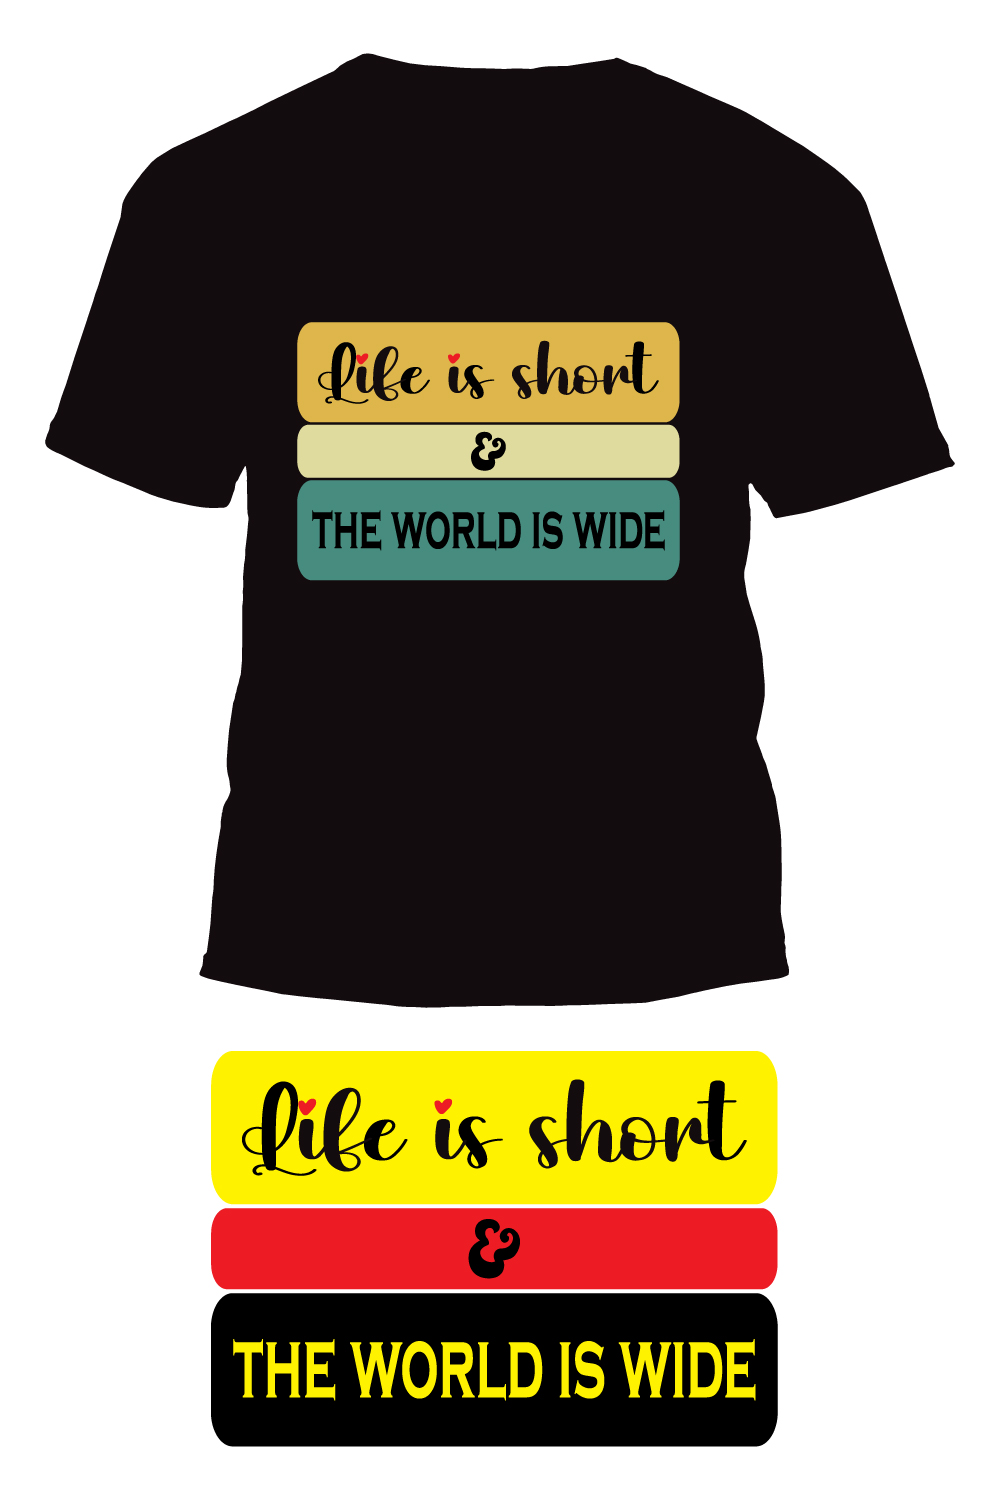 Life is short and the world is wide typography quotes t shirt design pinterest preview image.